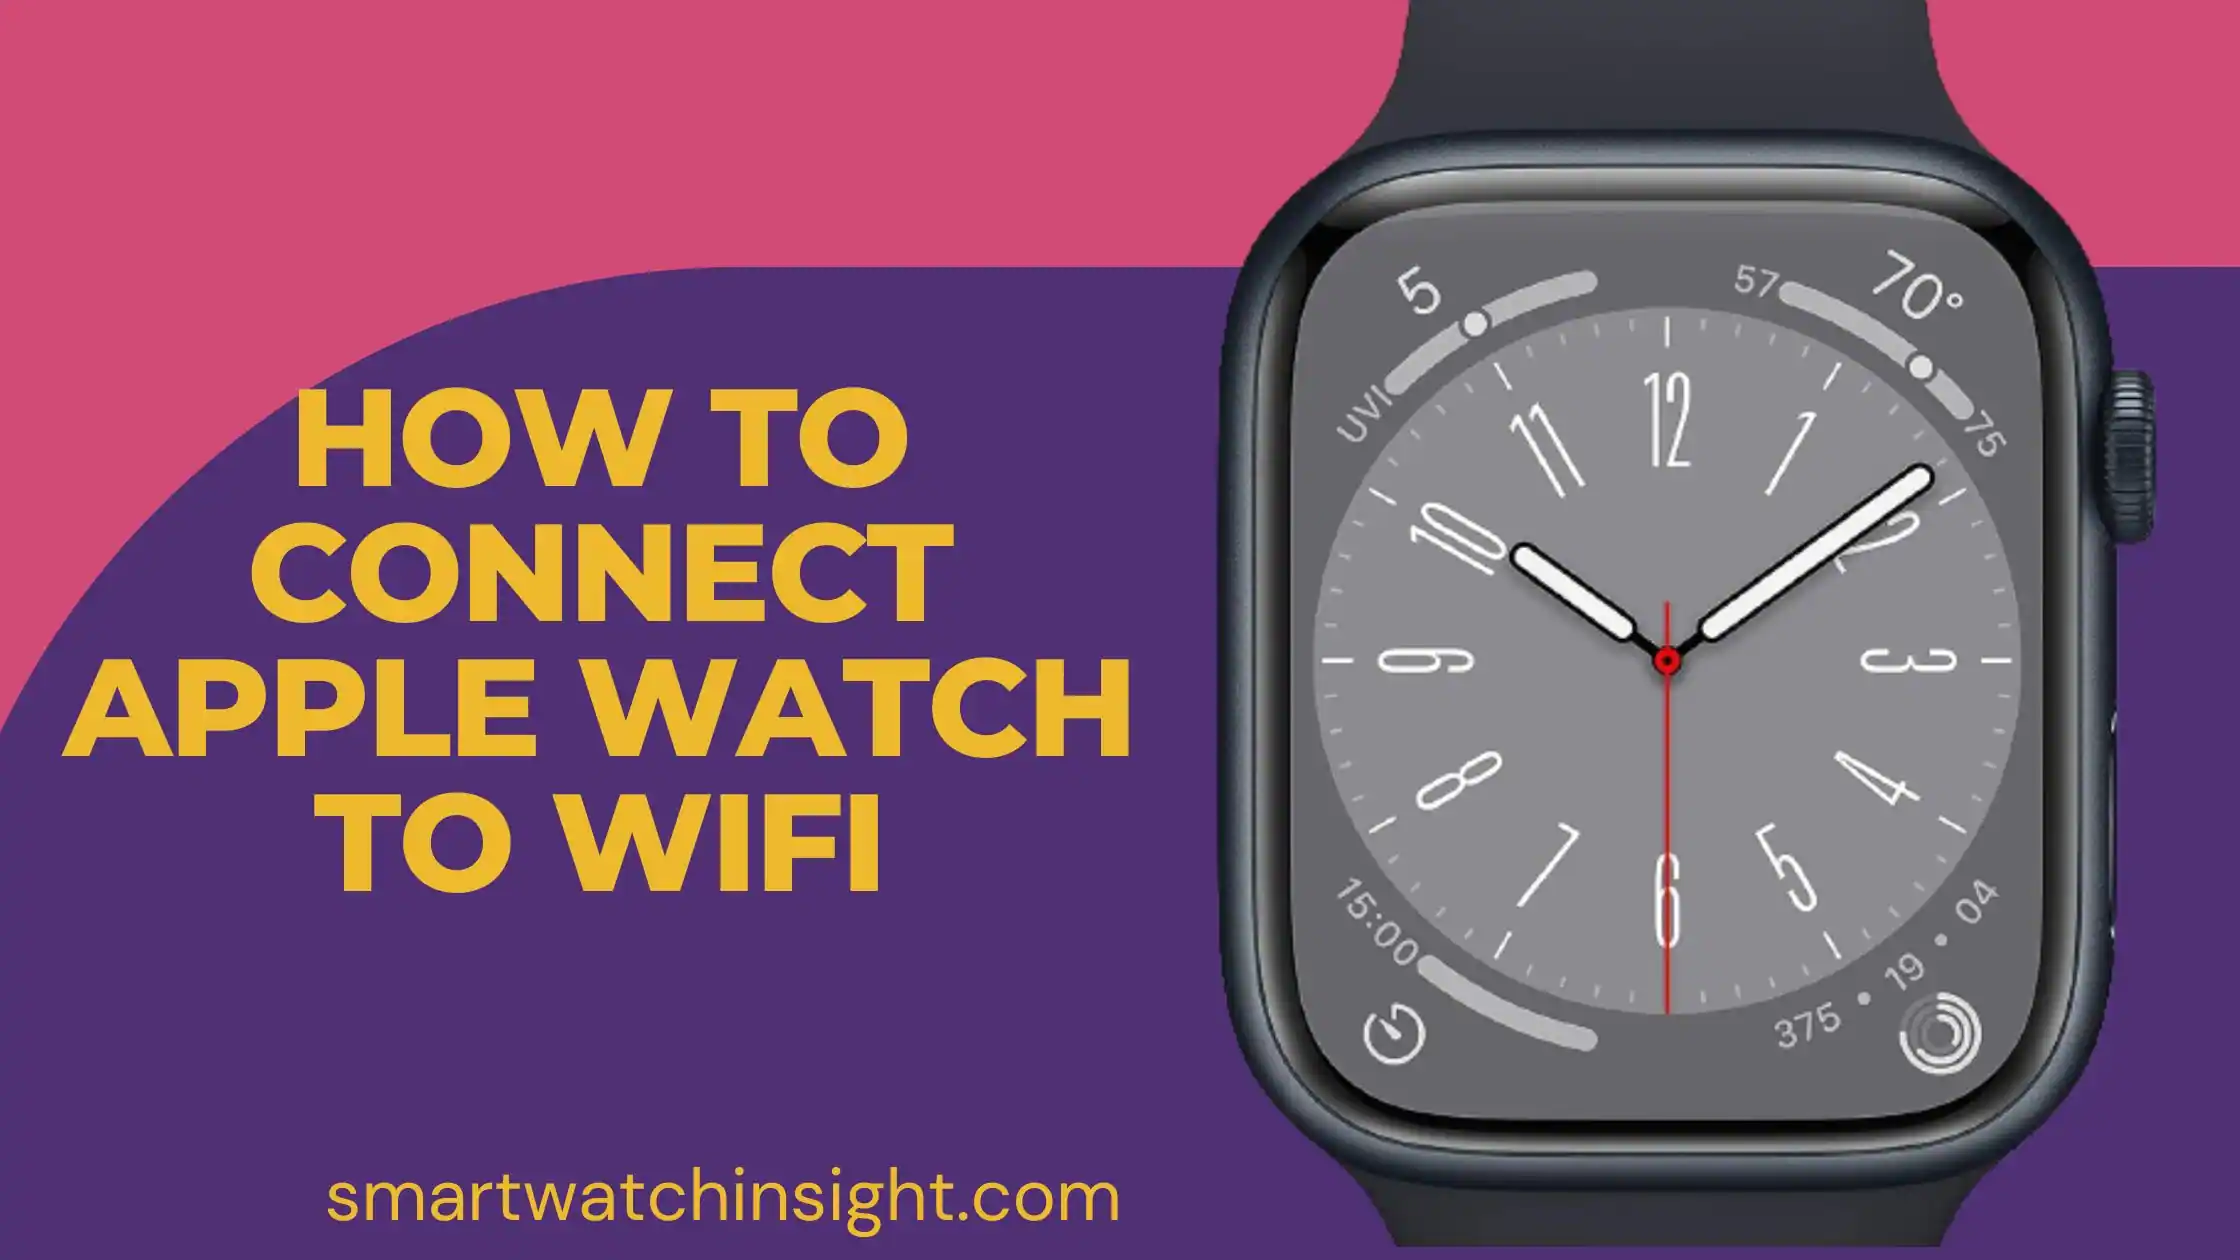 How to Connect Apple Watch to WiFi